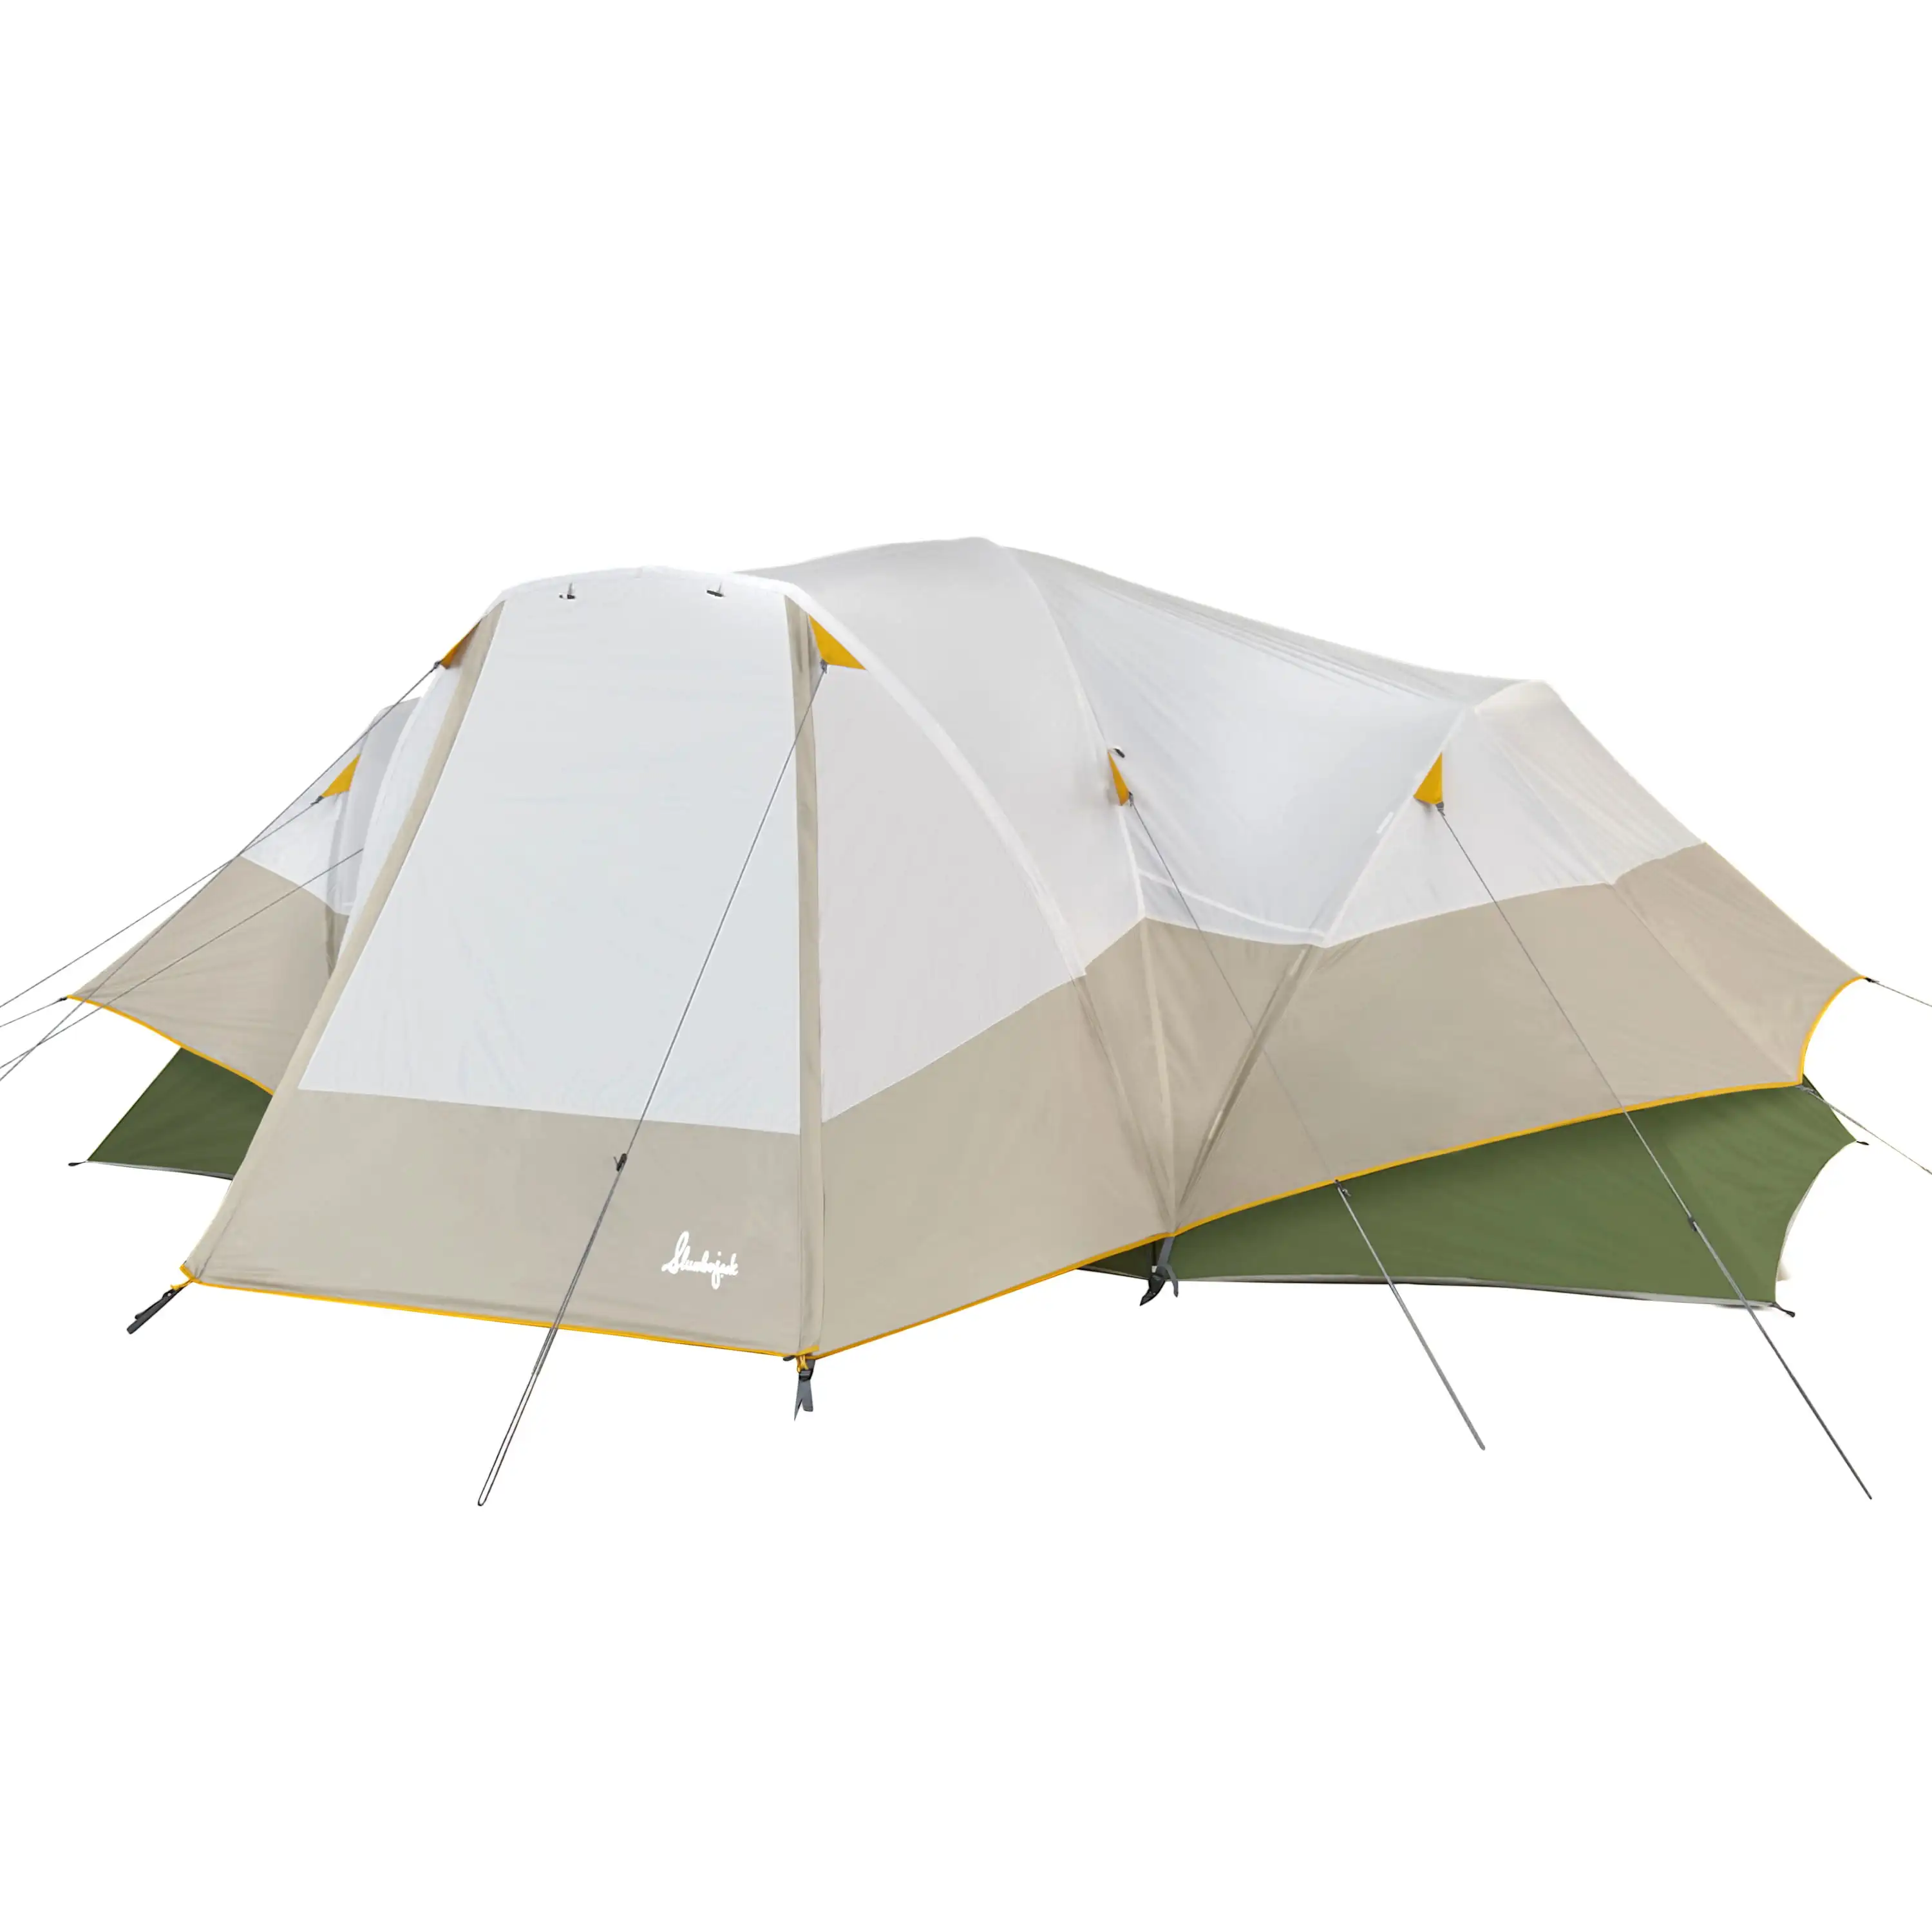 

Aspen Grove 8-Person 2 Room Hybrid Dome Tent, with Full Fly, Off-White / Green